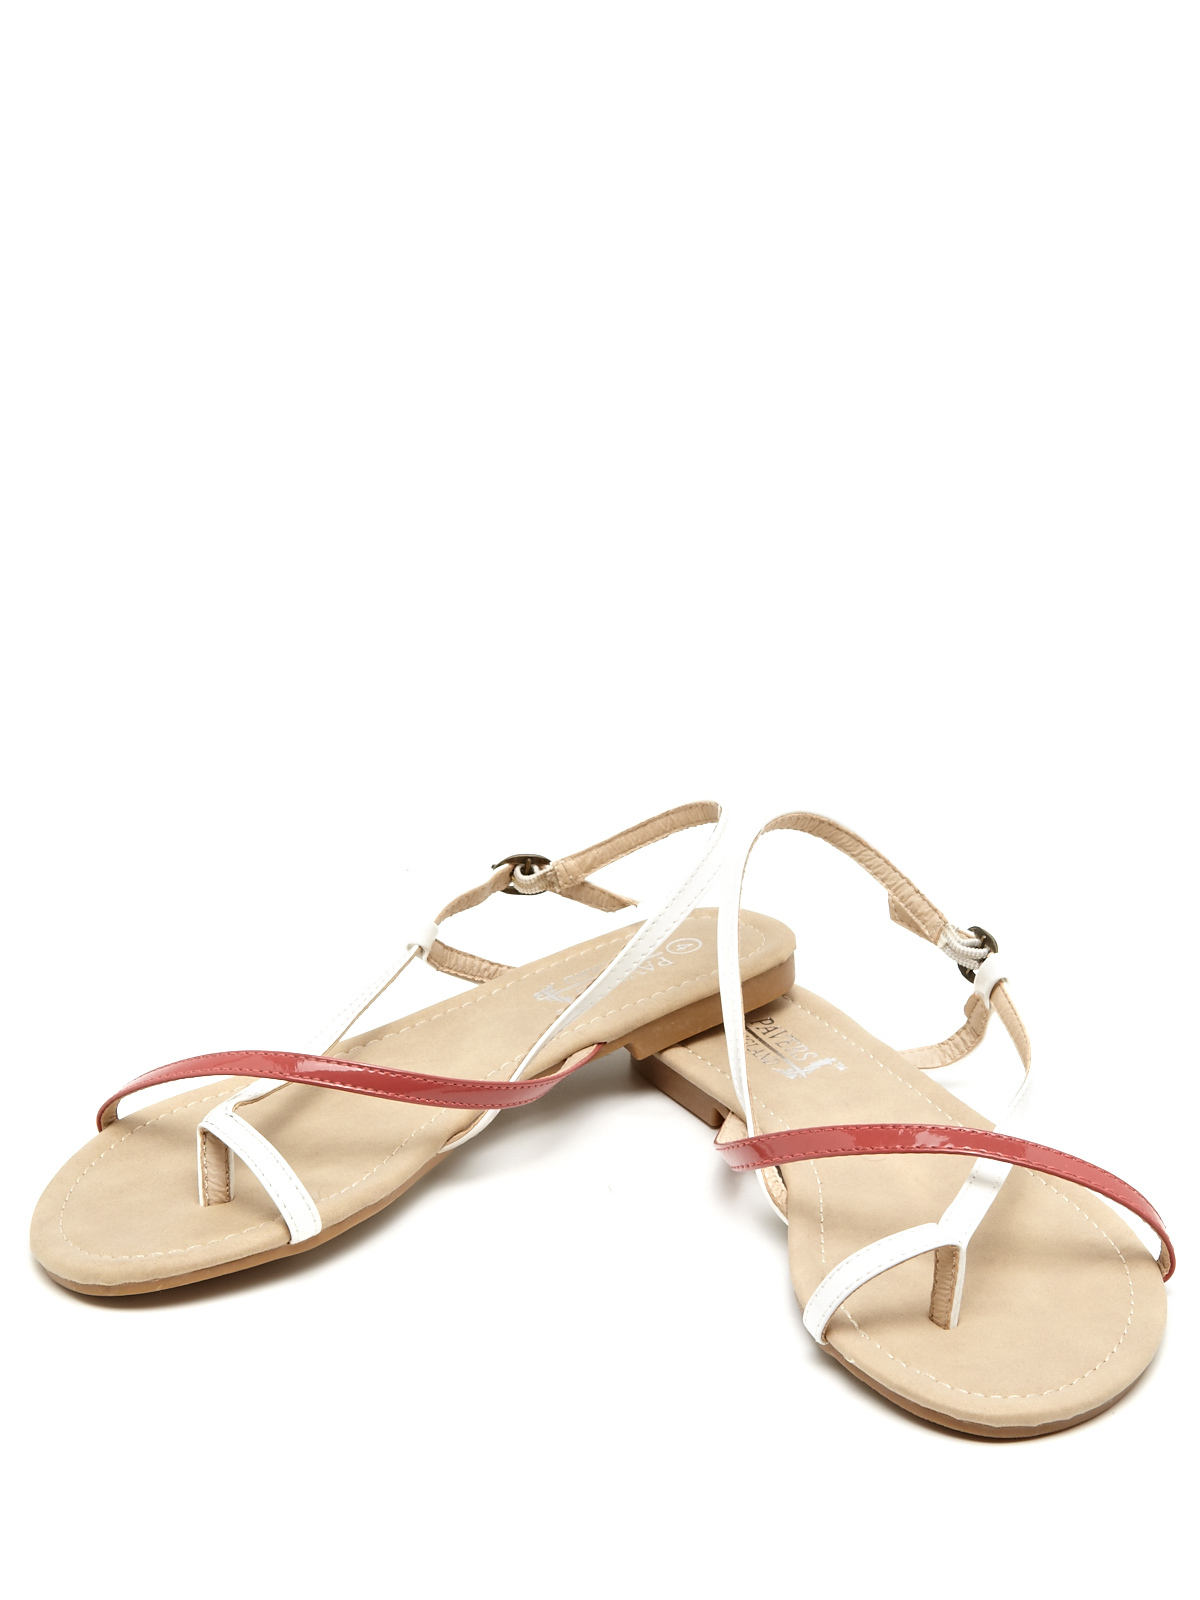 Buy Strappy Summer Sandals Online- Shopclues.com